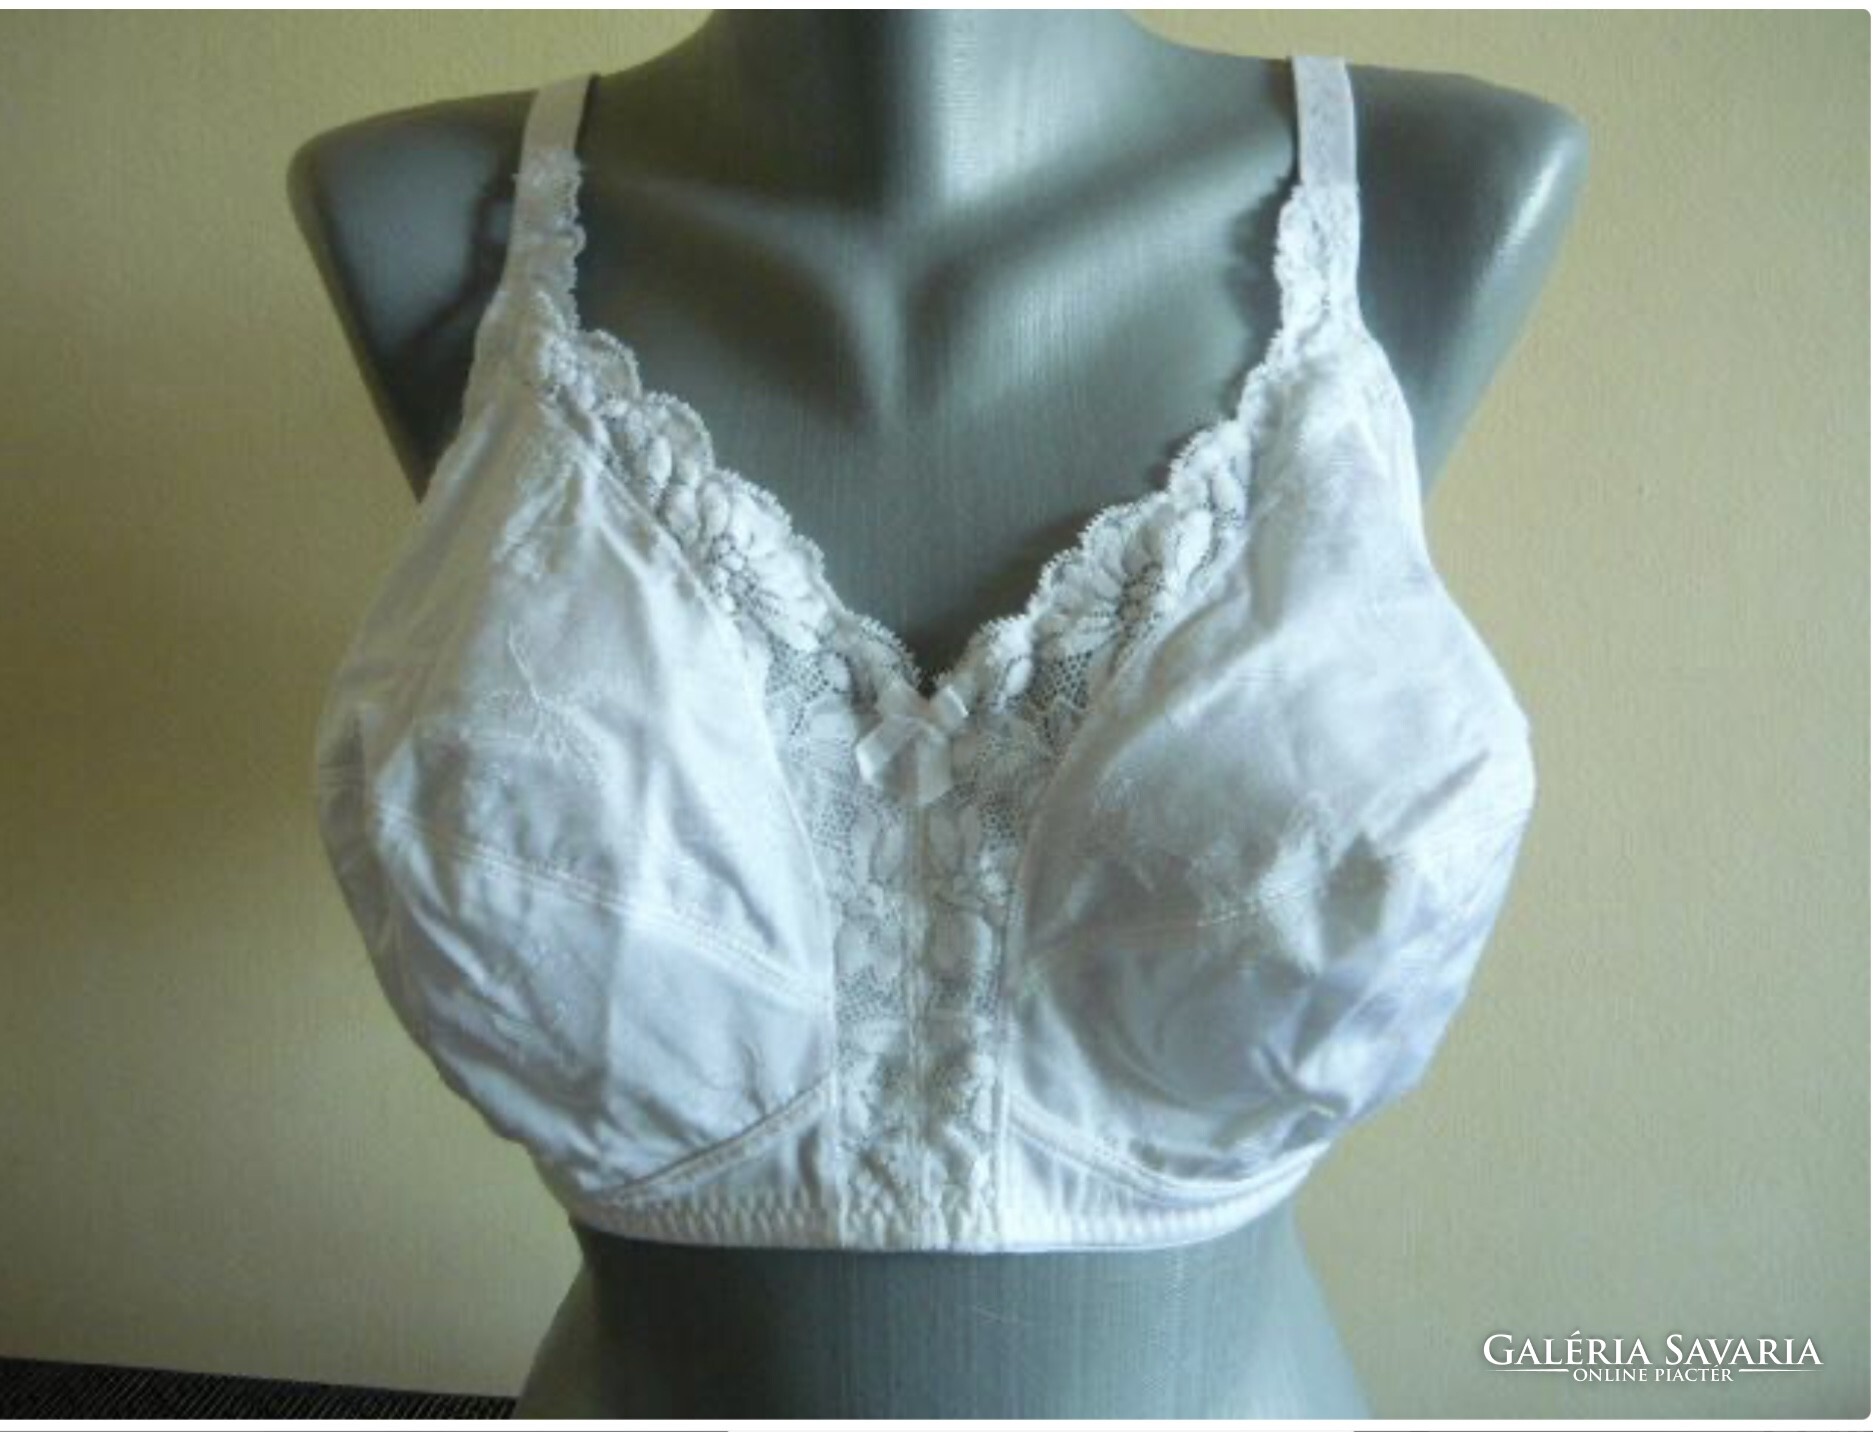 White lace bra 95/d - Wardrobe  Galeria Savaria online marketplace - Buy  or sell on a reliable, quality online platform!